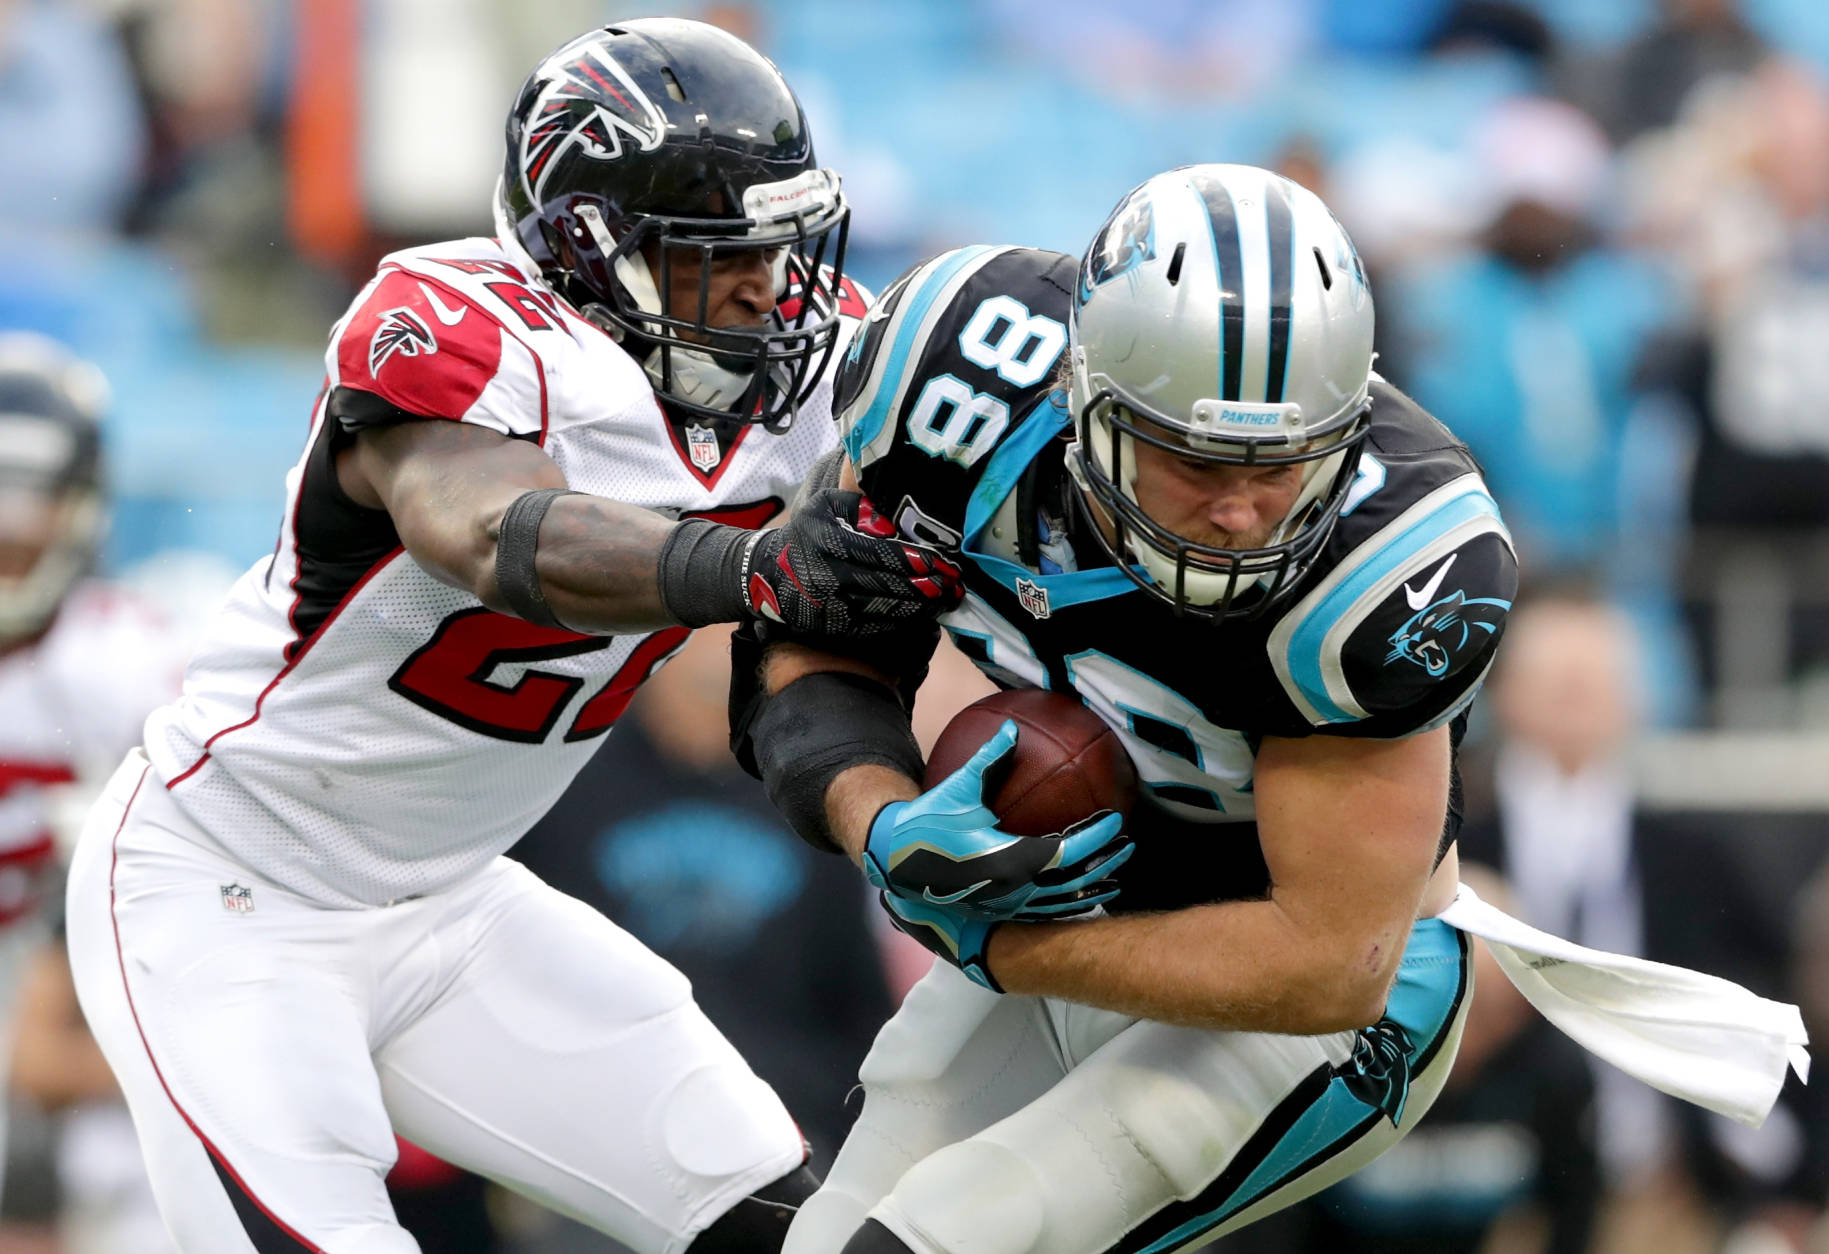 CHARLOTTE, NC - DECEMBER 24:   Greg Olsen #88 of the Carolina Panthers runs the ball against  Keanu Neal #22 of the Atlanta Falcons in the 2nd half during their game at Bank of America Stadium on December 24, 2016 in Charlotte, North Carolina.  (Photo by Streeter Lecka/Getty Images)